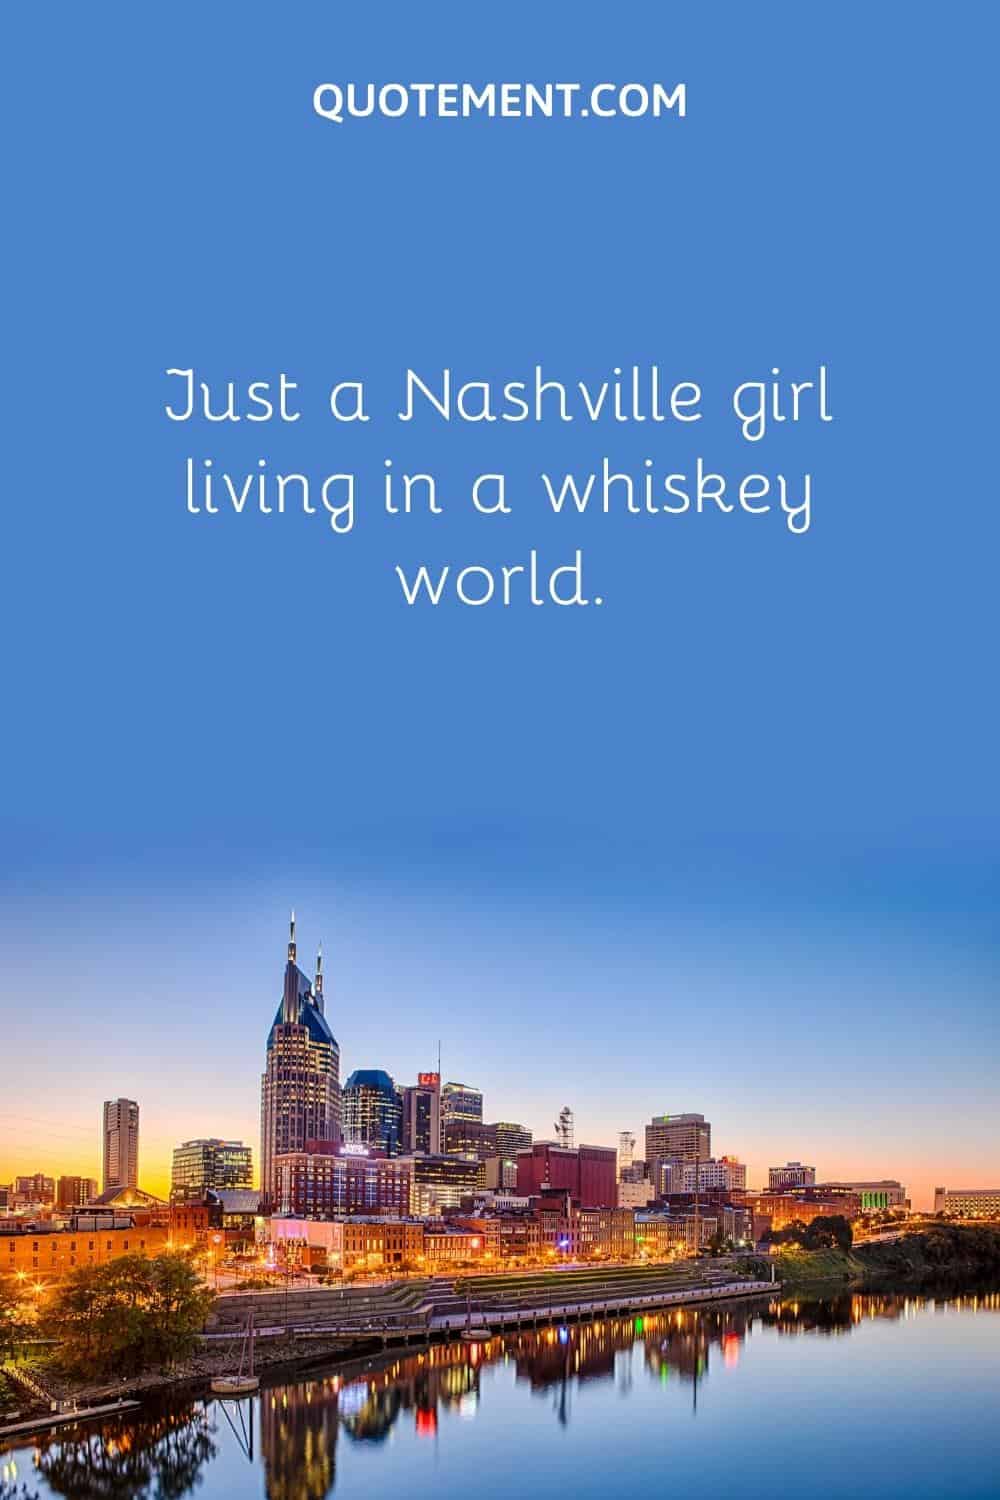 Just a Nashville girl living in a whiskey world.